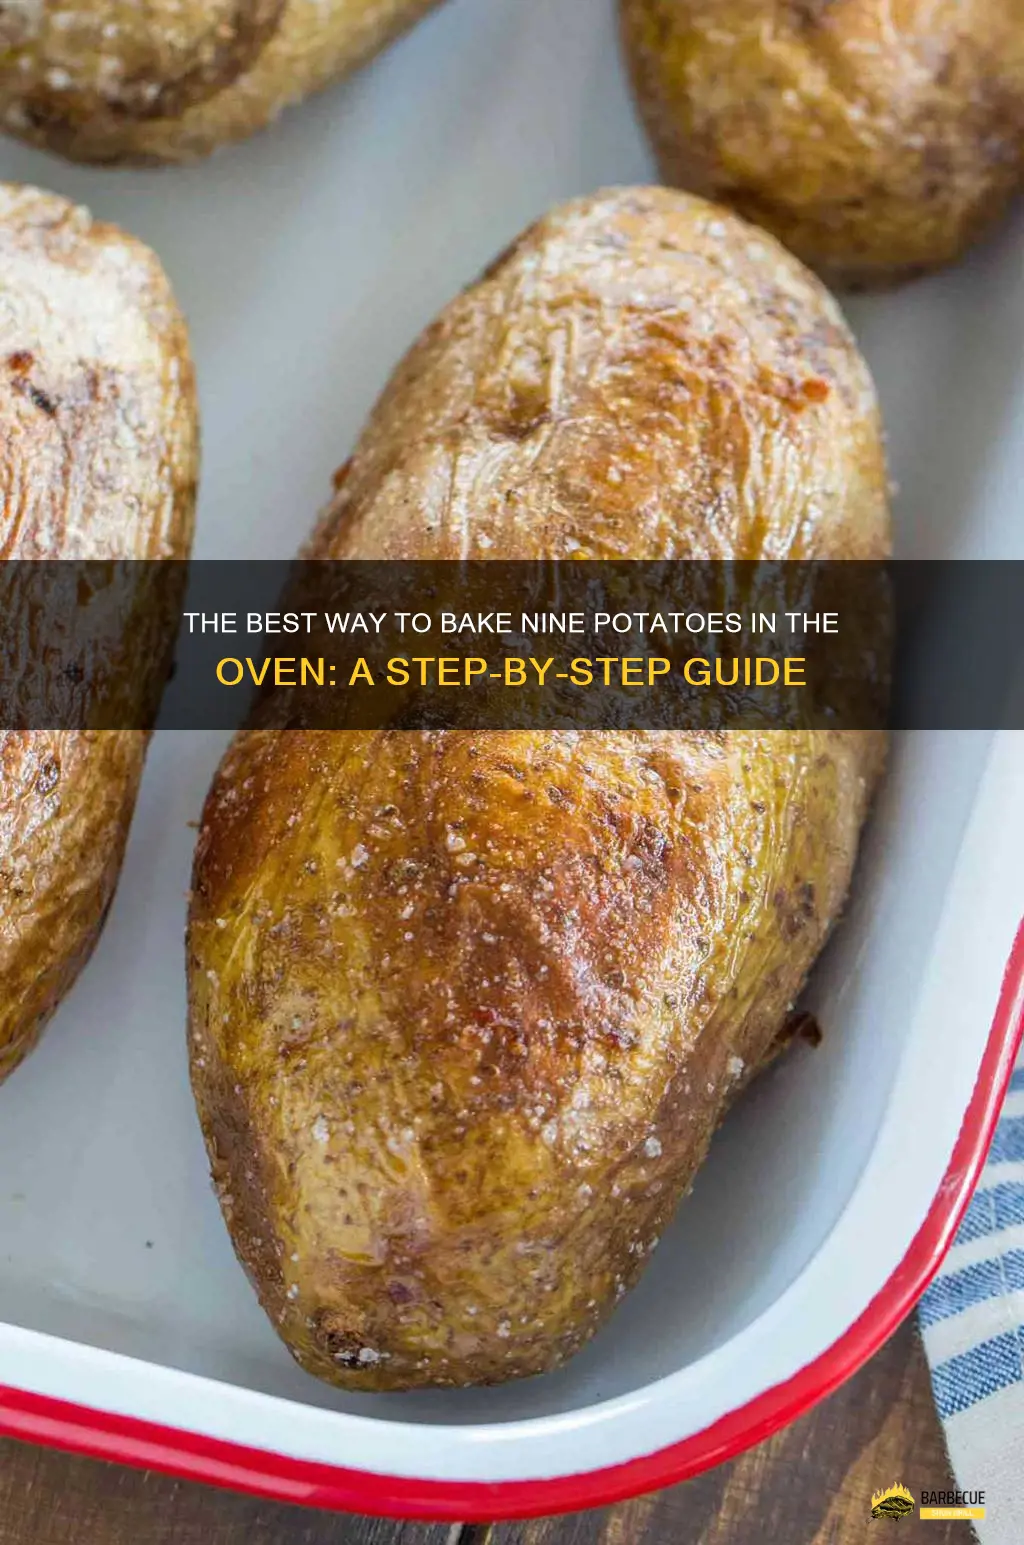 The Best Way To Bake Nine Potatoes In The Oven: A Step-By-Step Guide ...